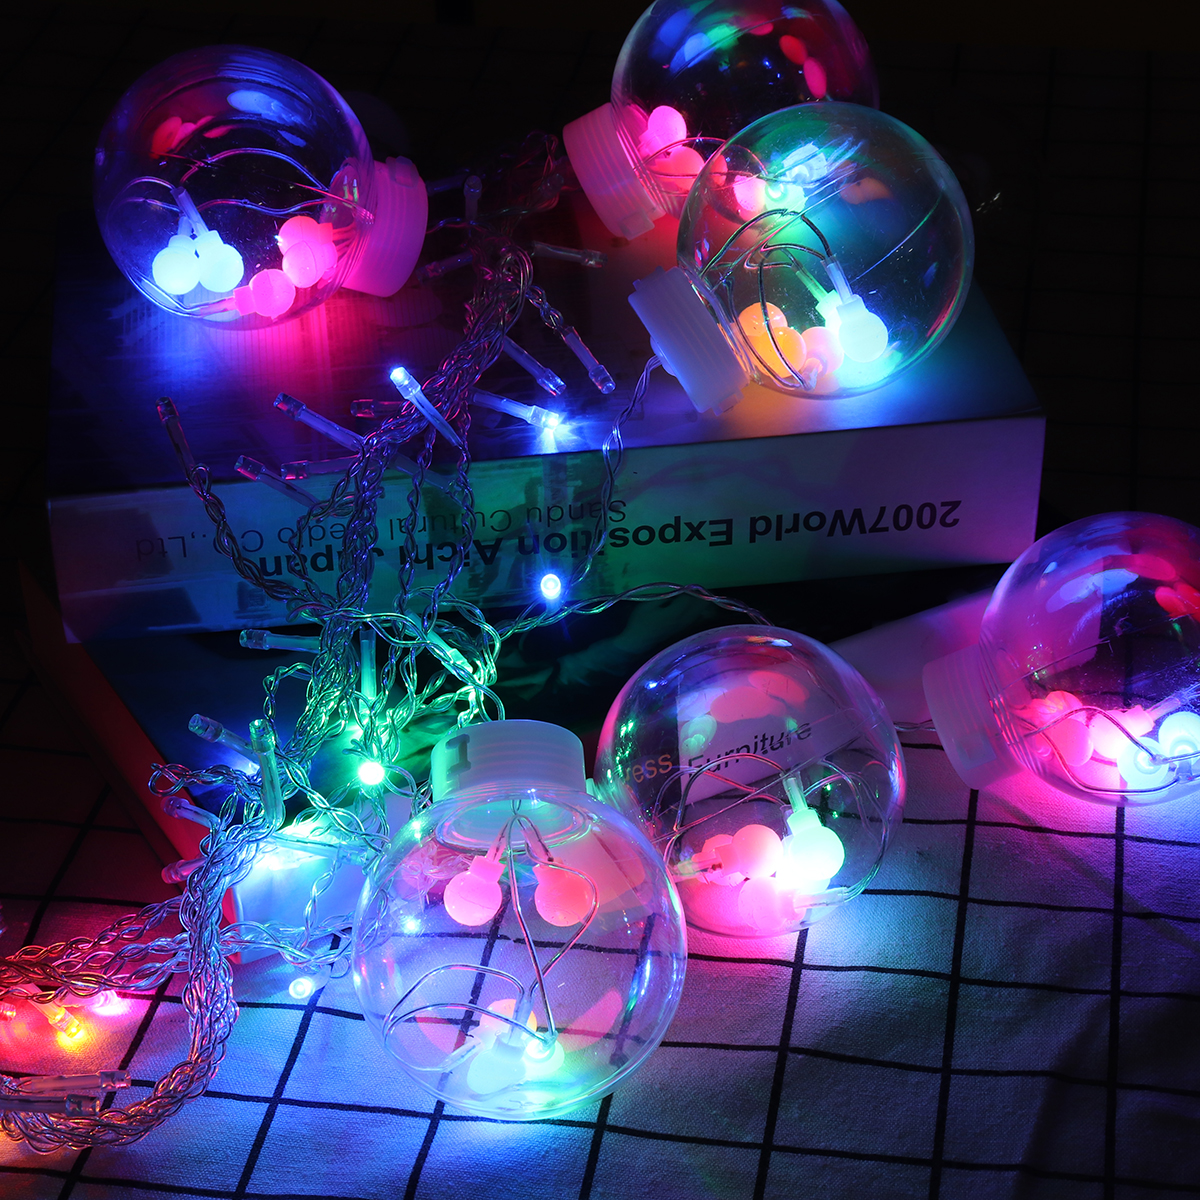 25M-Warm-White-Colorful-LED-Curtain-Fairy-Christmas-String-Light-Ball-Bulb-Home-Wedding-Party-Holida-1629932-6